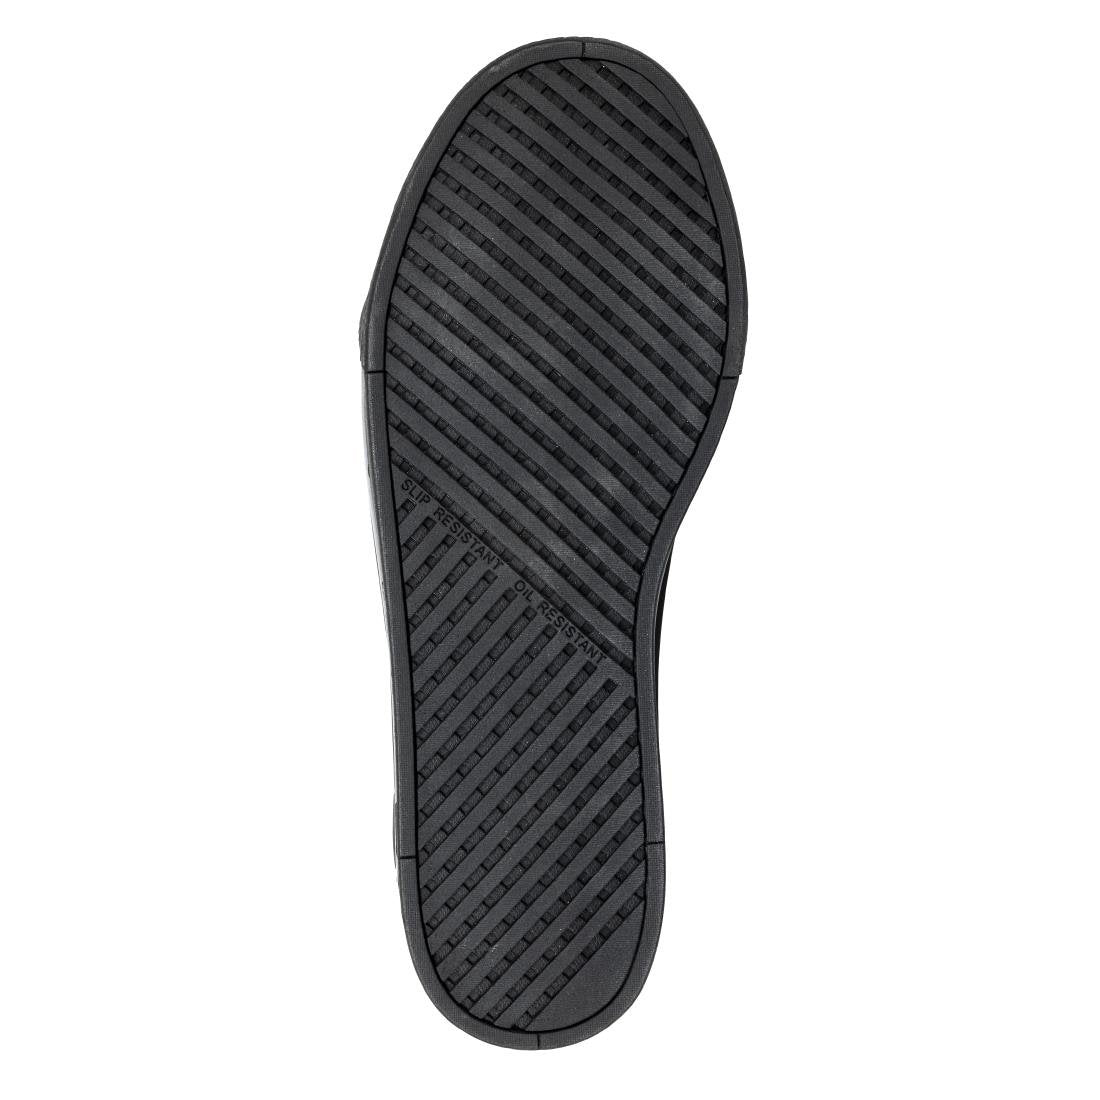 BA060-41 Slipbuster Recycled Microfibre Safety Trainers Matte Black 41 JD Catering Equipment Solutions Ltd